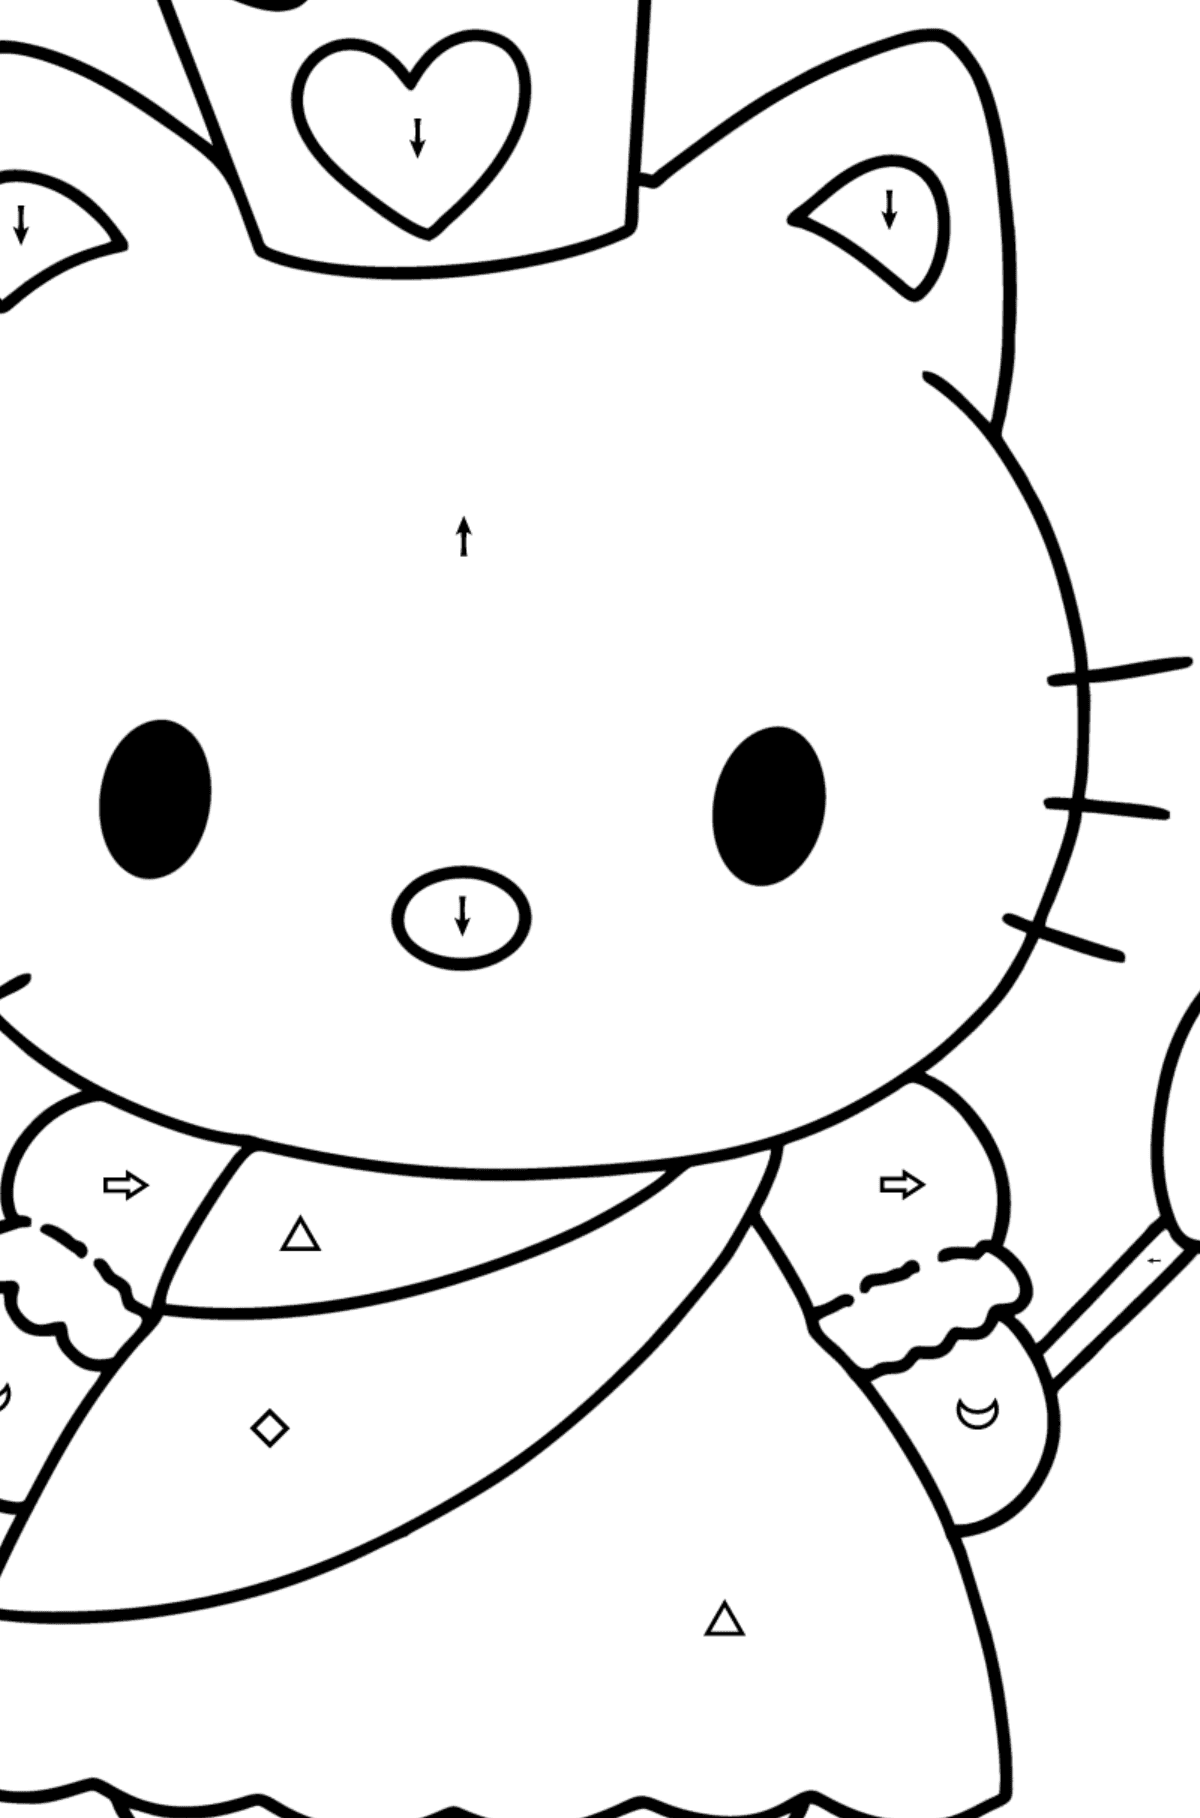 Hello Kitty Princess coloring page - Coloring by Symbols and Geometric Shapes for Kids